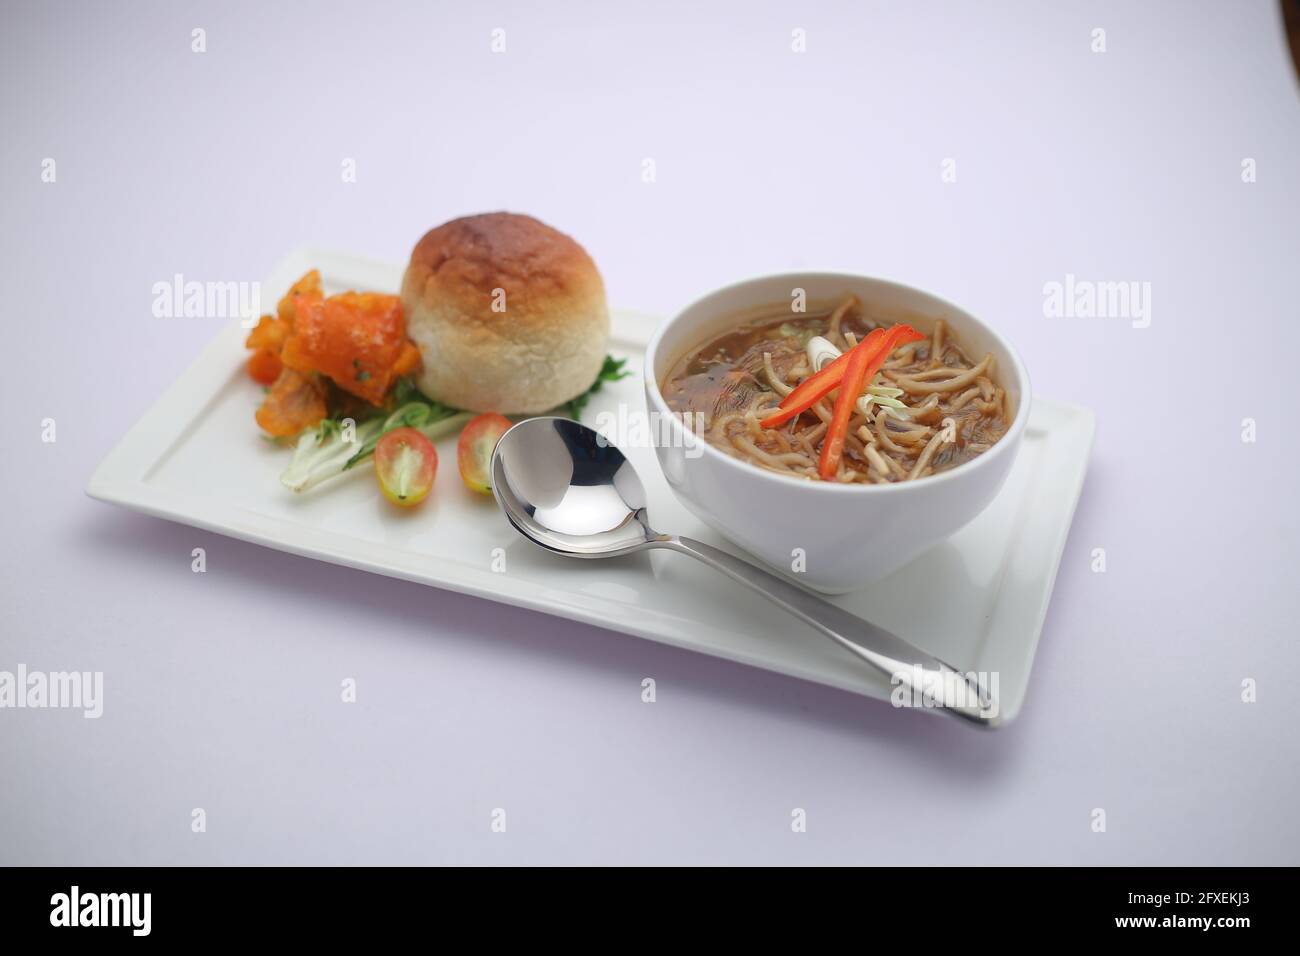 Chicken Manchow soup,garnished with vegetables and noodles arranged in a white bowl with white texture or background Stock Photo